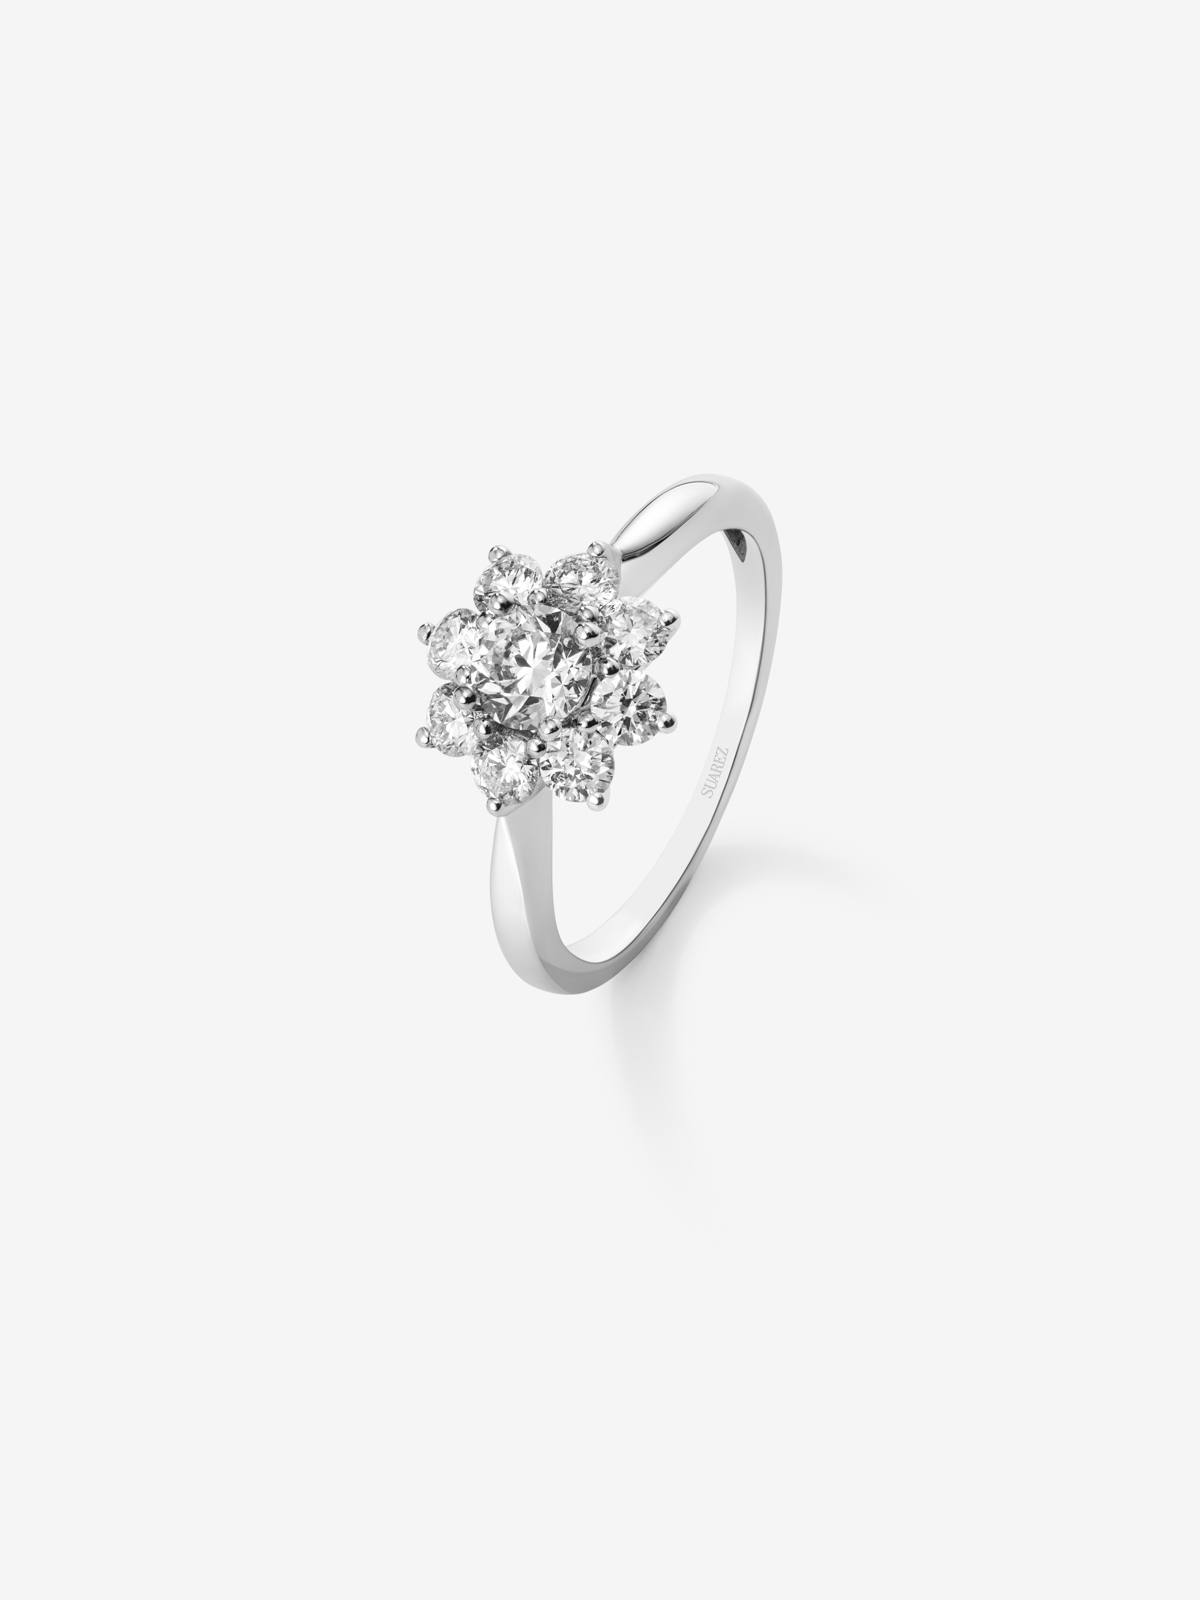 18K White Gold Engagement Solitaire Ring with Diamond